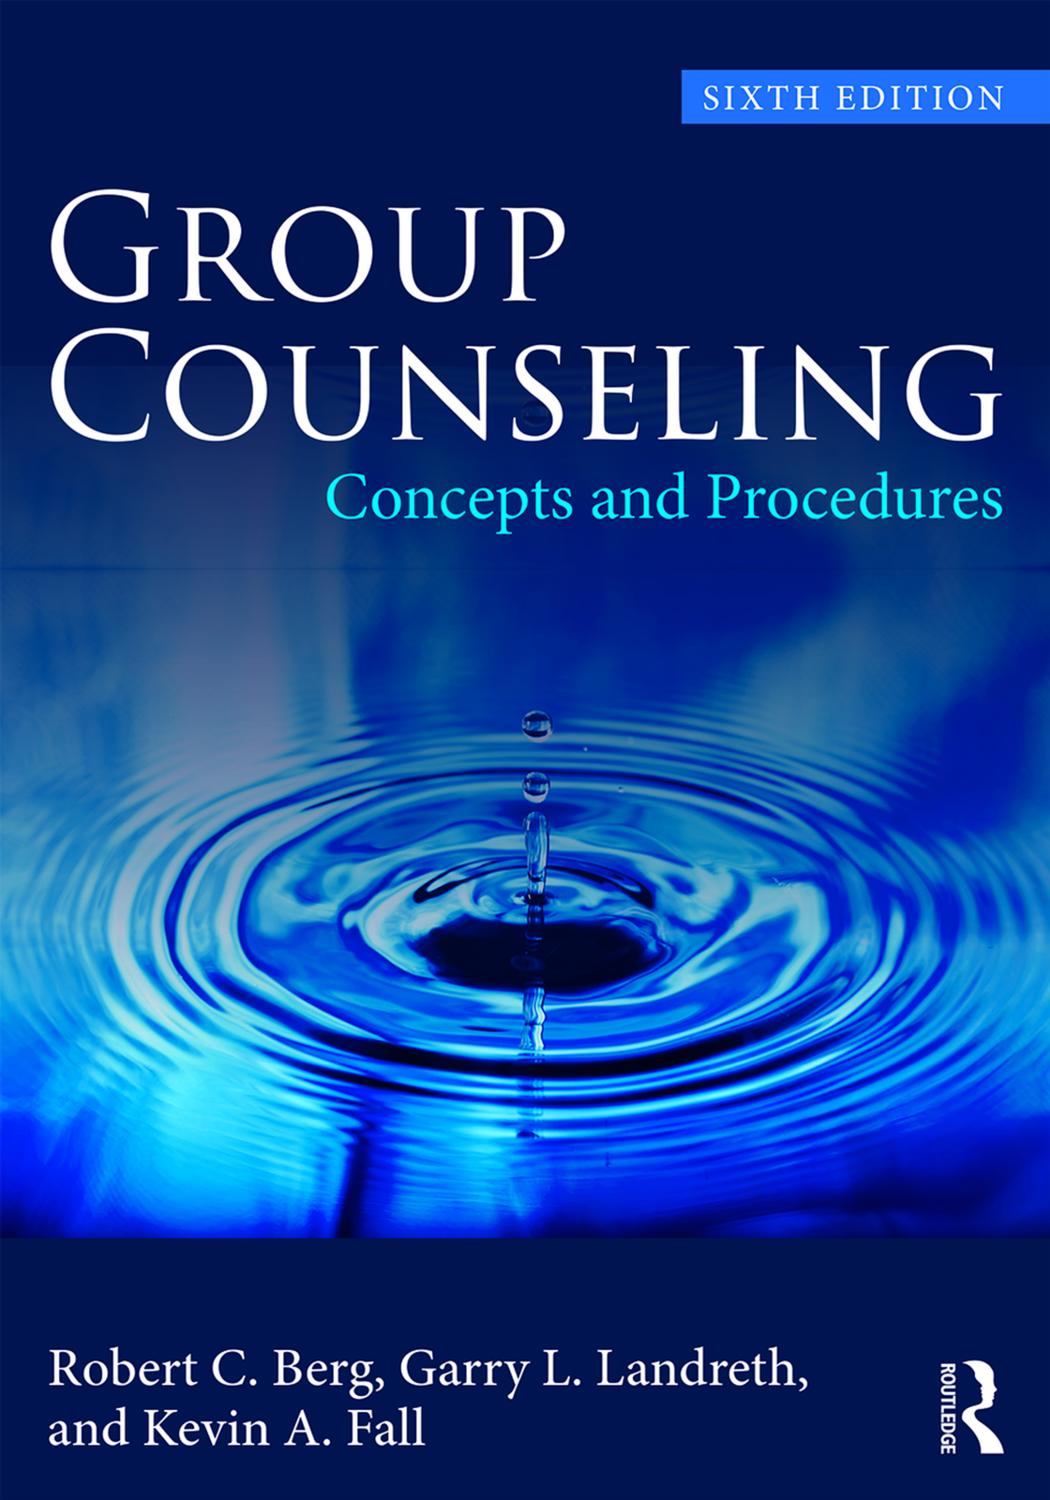 Group Counseling  Concepts and Procedures 2017